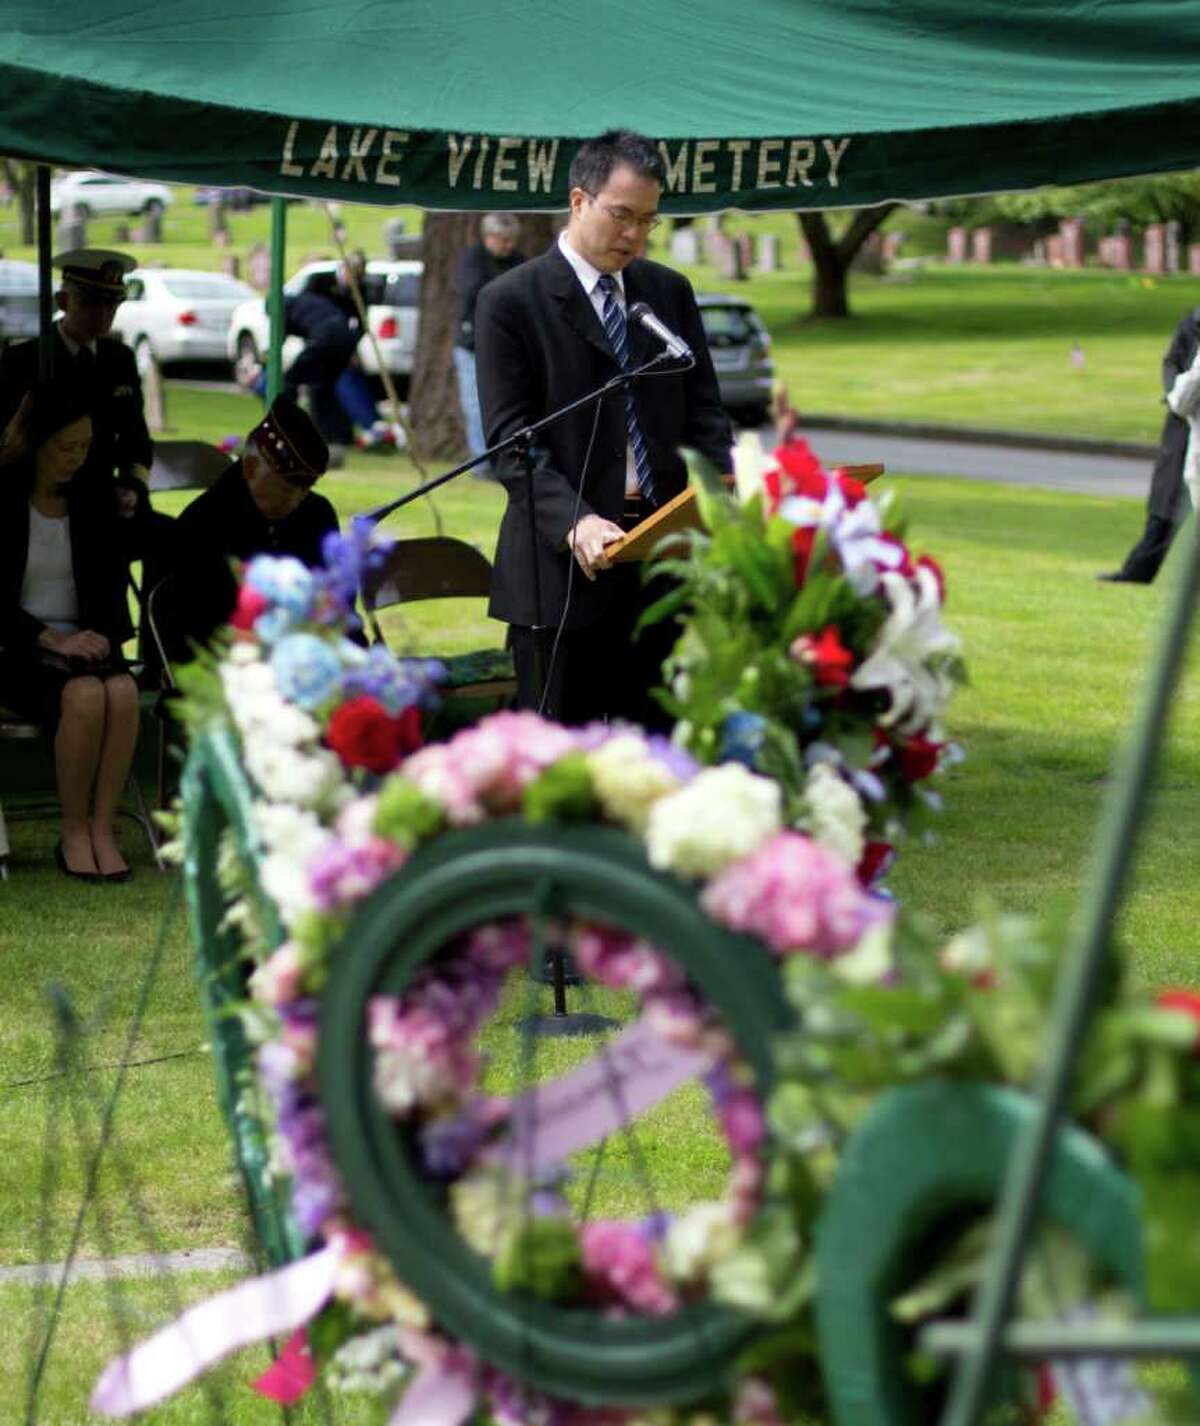 Rev. Dr. J. P. Kang, of the Japanese Presbyterian Church gives a benediction speech in front of the Nisei Veteran Memorial at Seattle's Lake View Cemetery on Memorial Day.